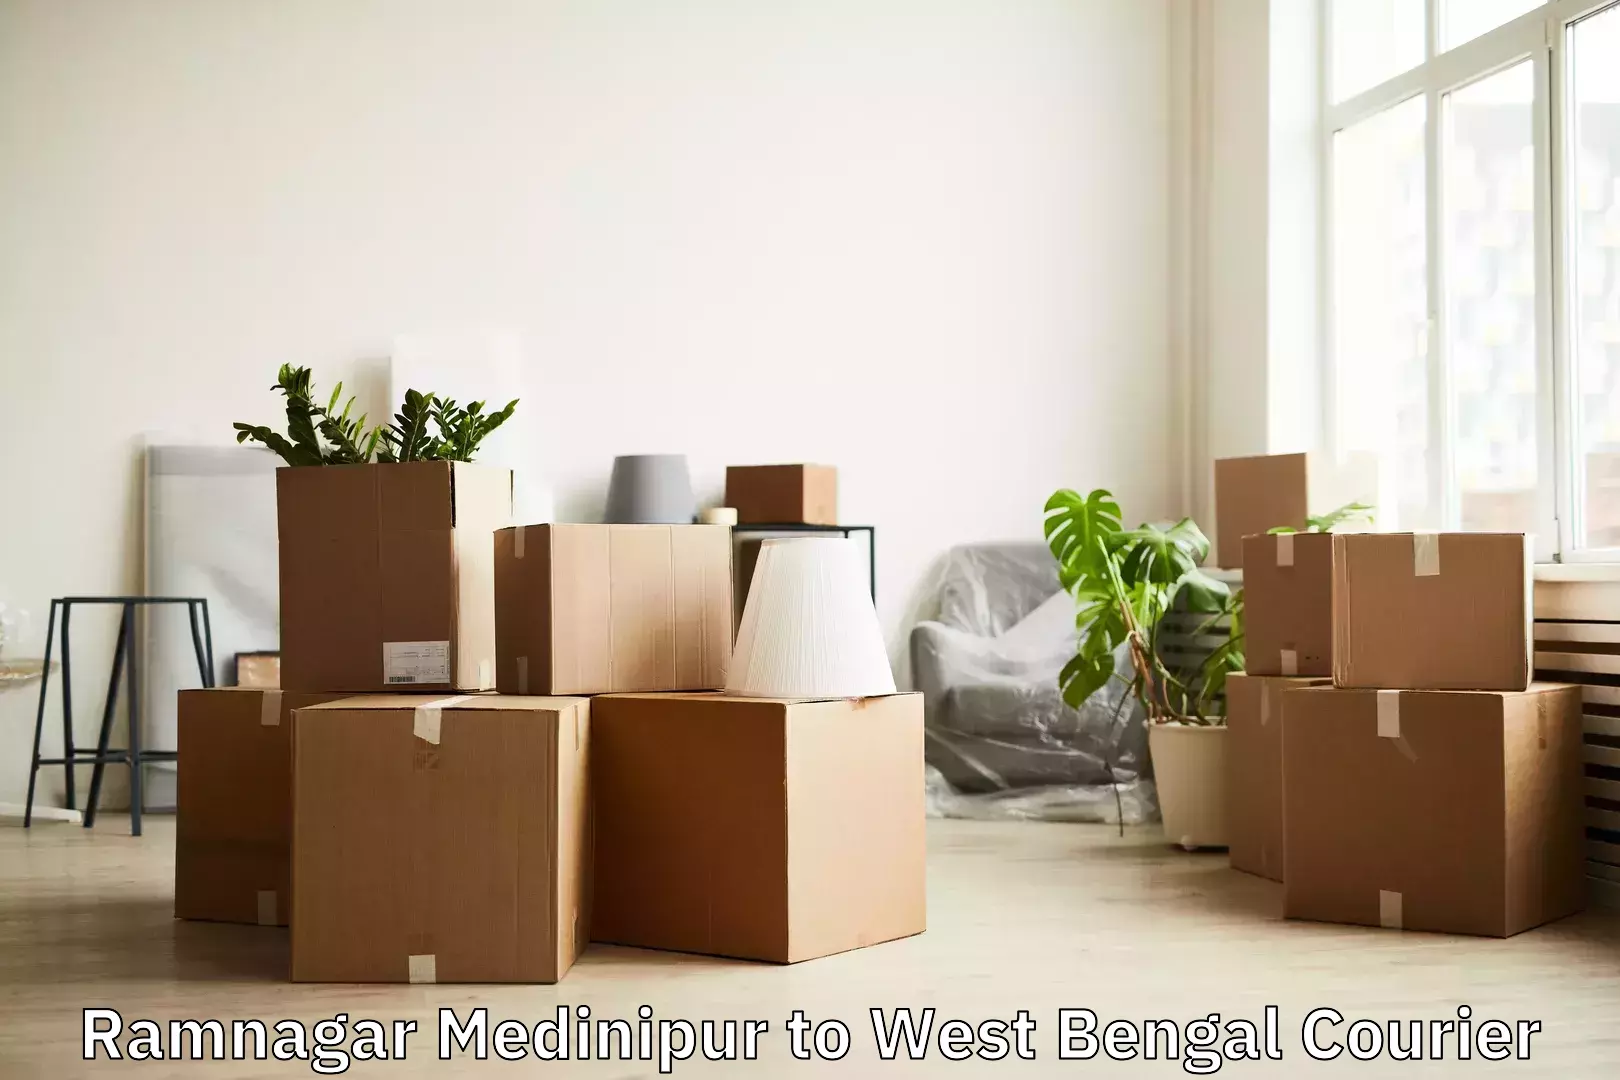 Professional baggage delivery in Ramnagar Medinipur to Kalimpong